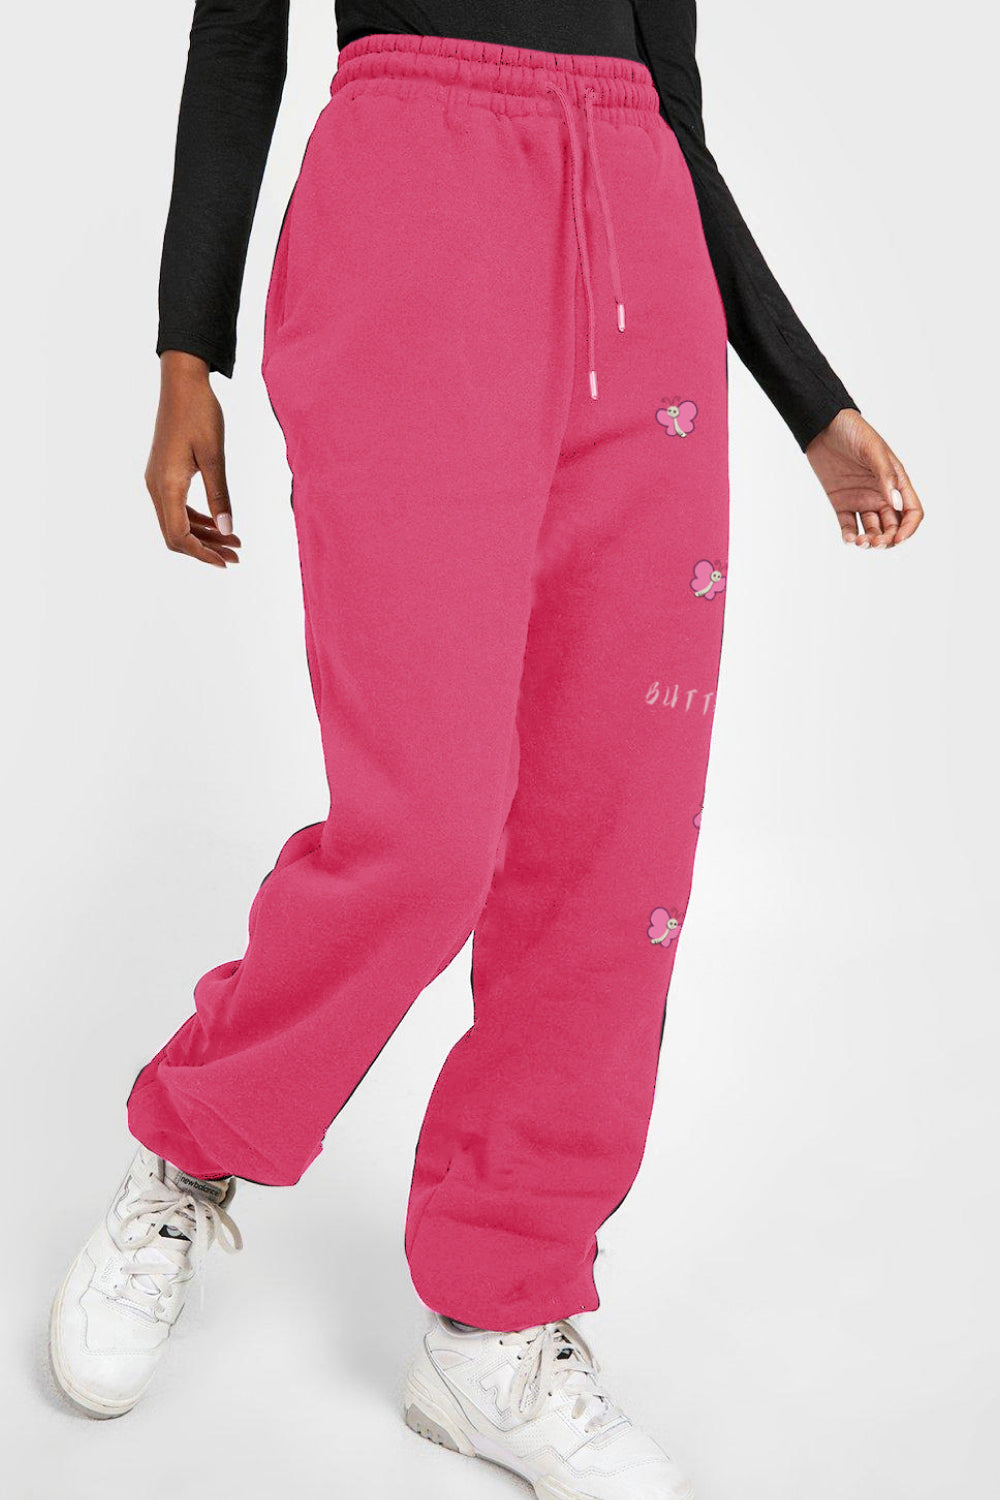 Simply Love Full Size Drawstring BUTTERFLY Graphic Long Sweatpants